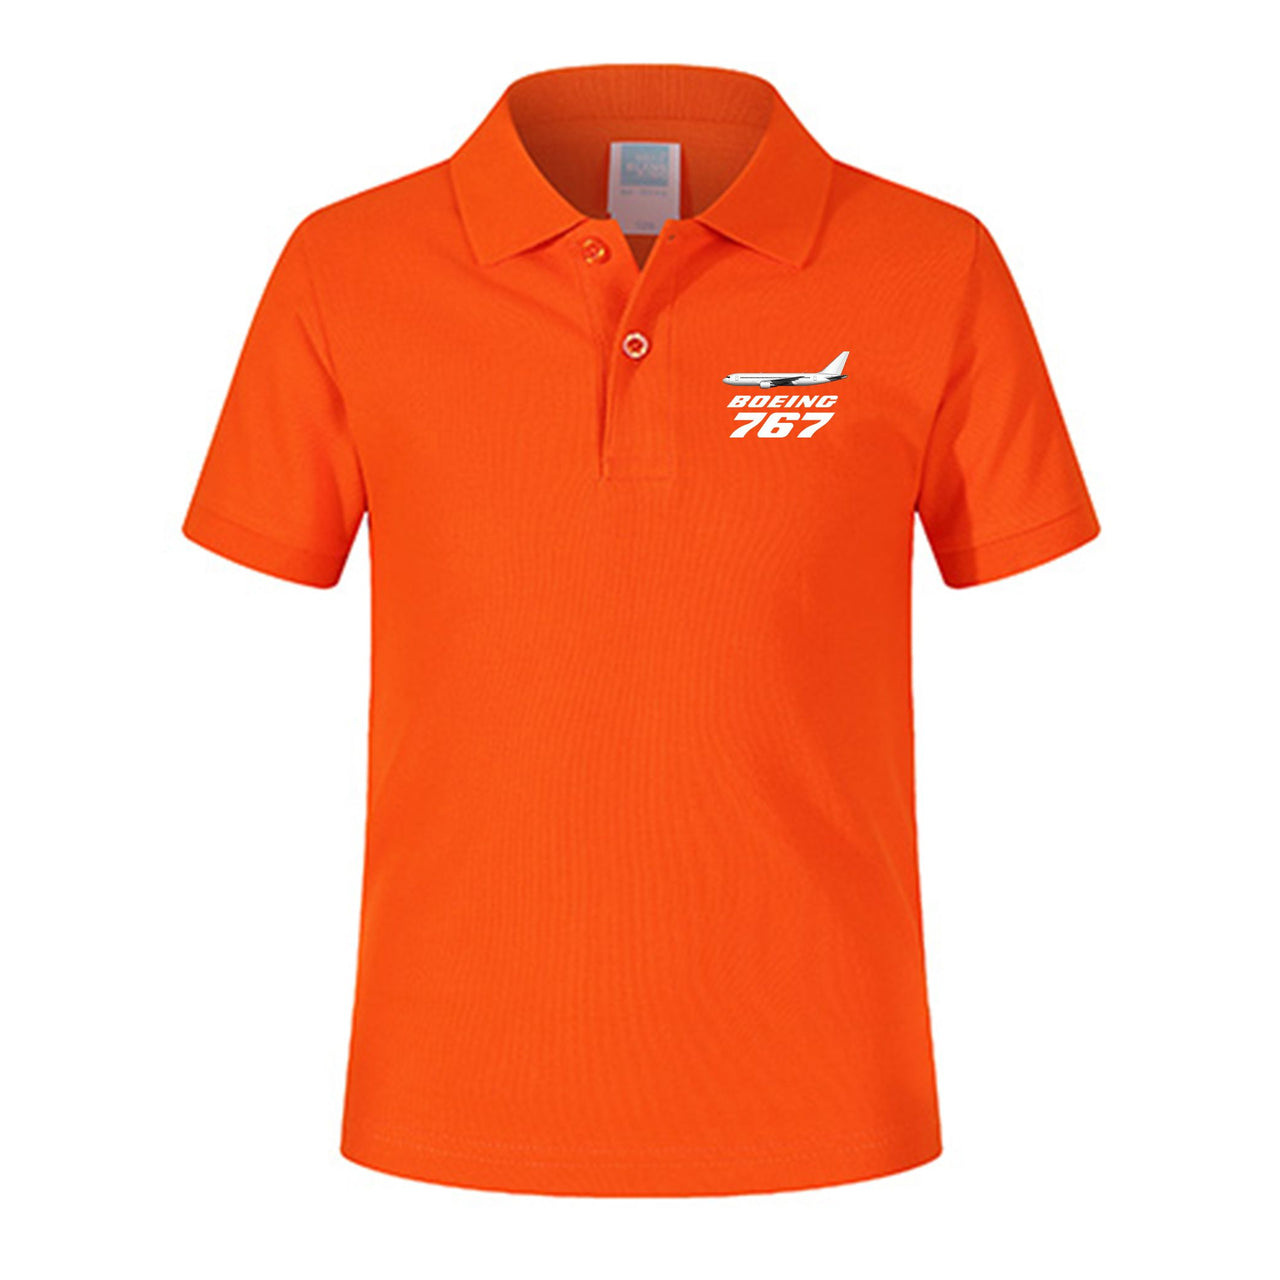 The Boeing 767 Designed Children Polo T-Shirts